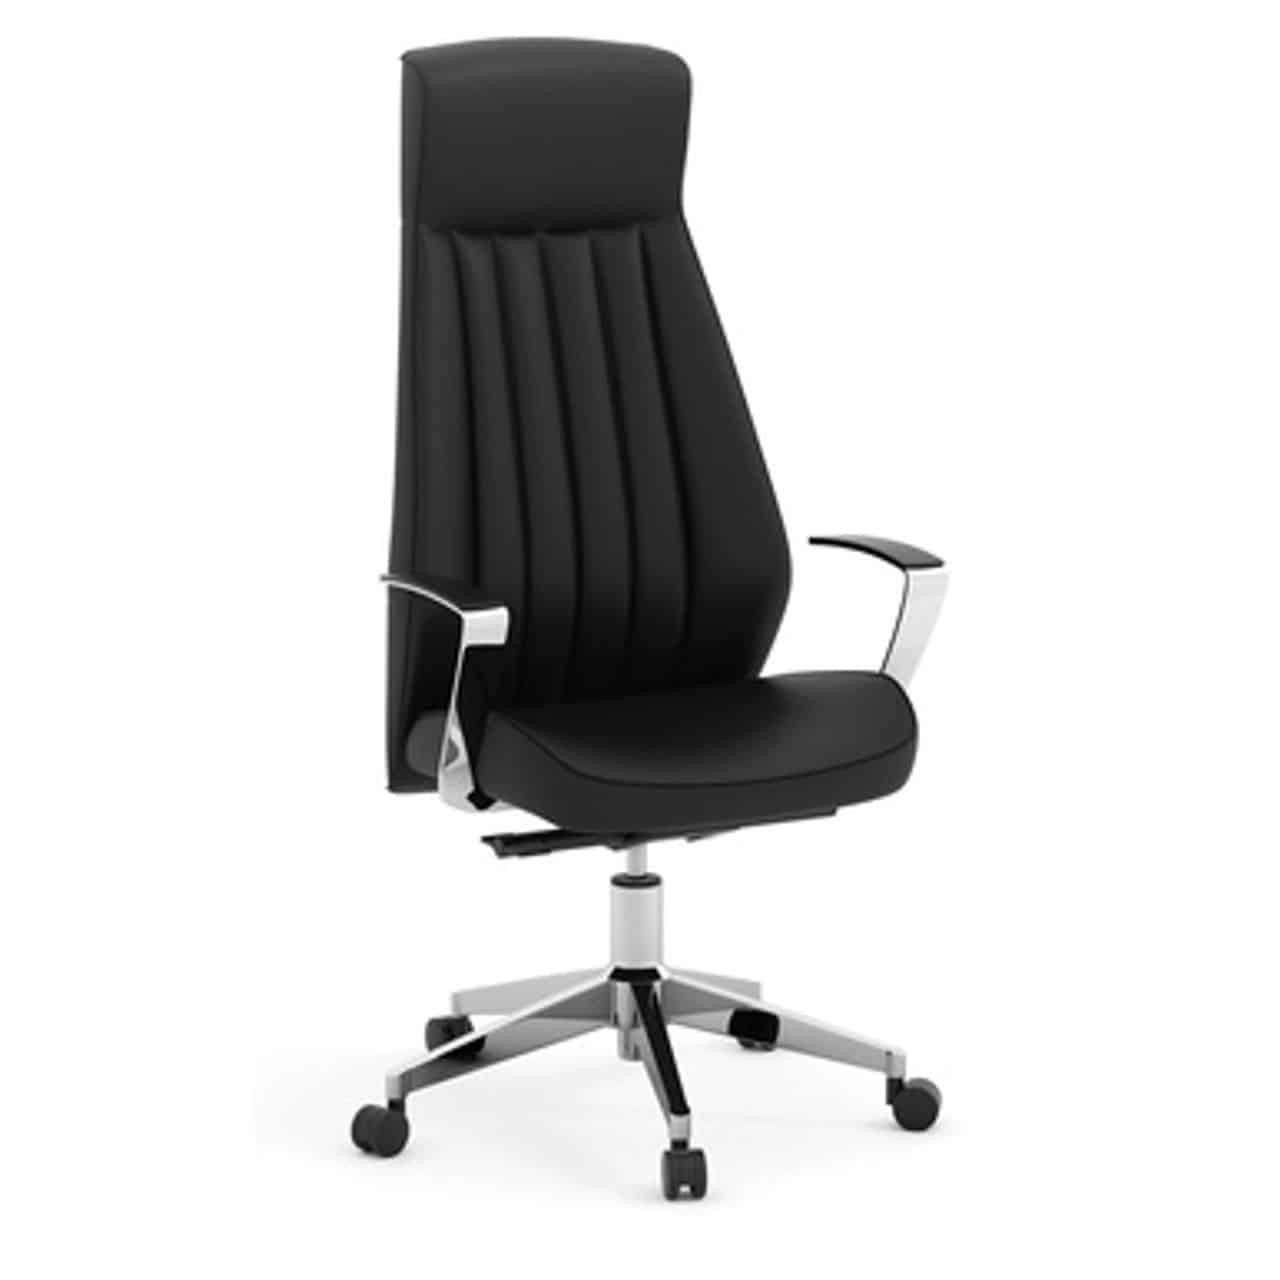 black leather high back executive chair